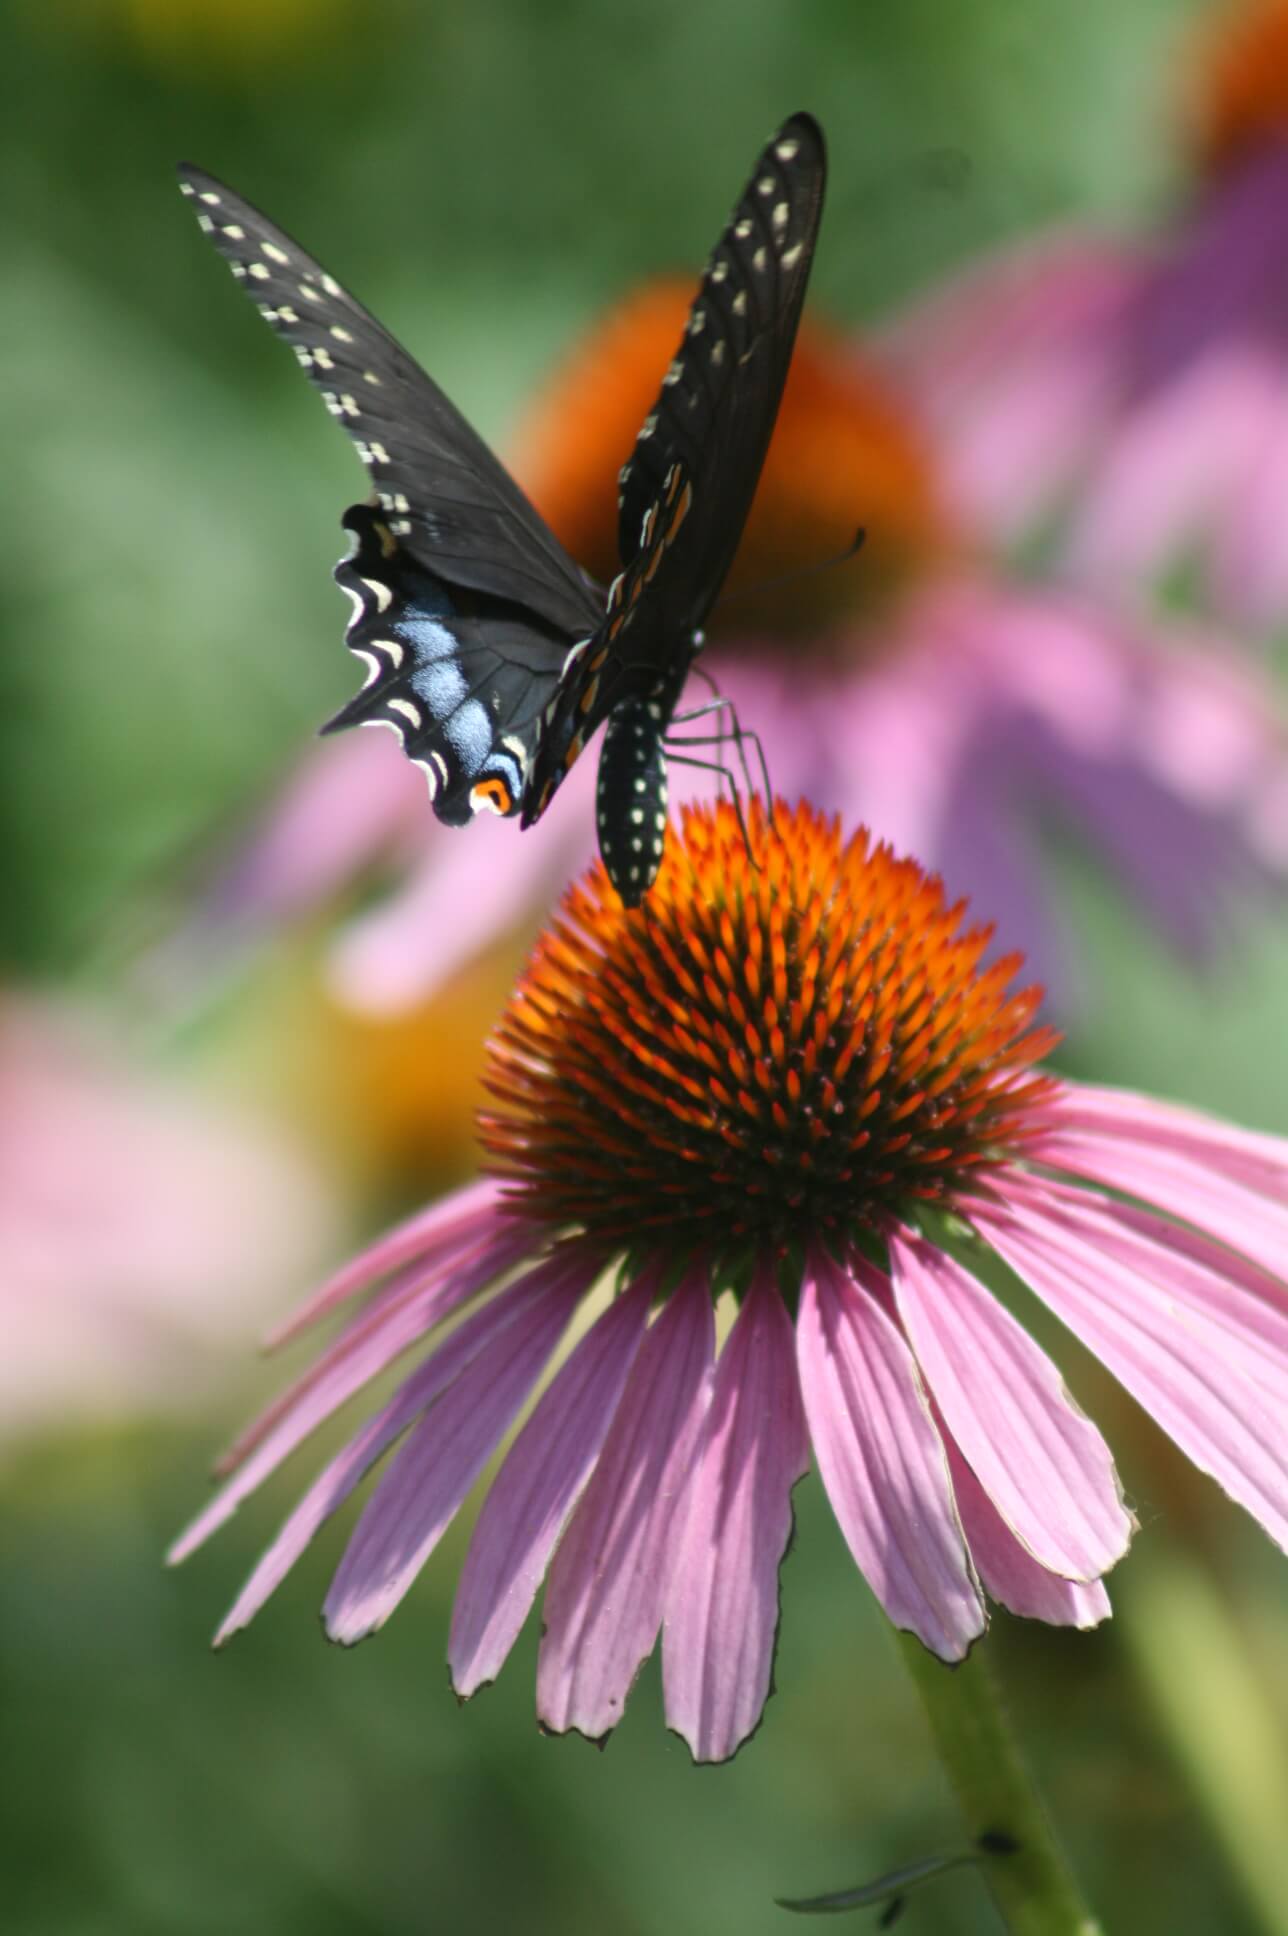 Black swallowtail butterfly perched with wind open atop a purple coneflower bloom as it gathers nectar.